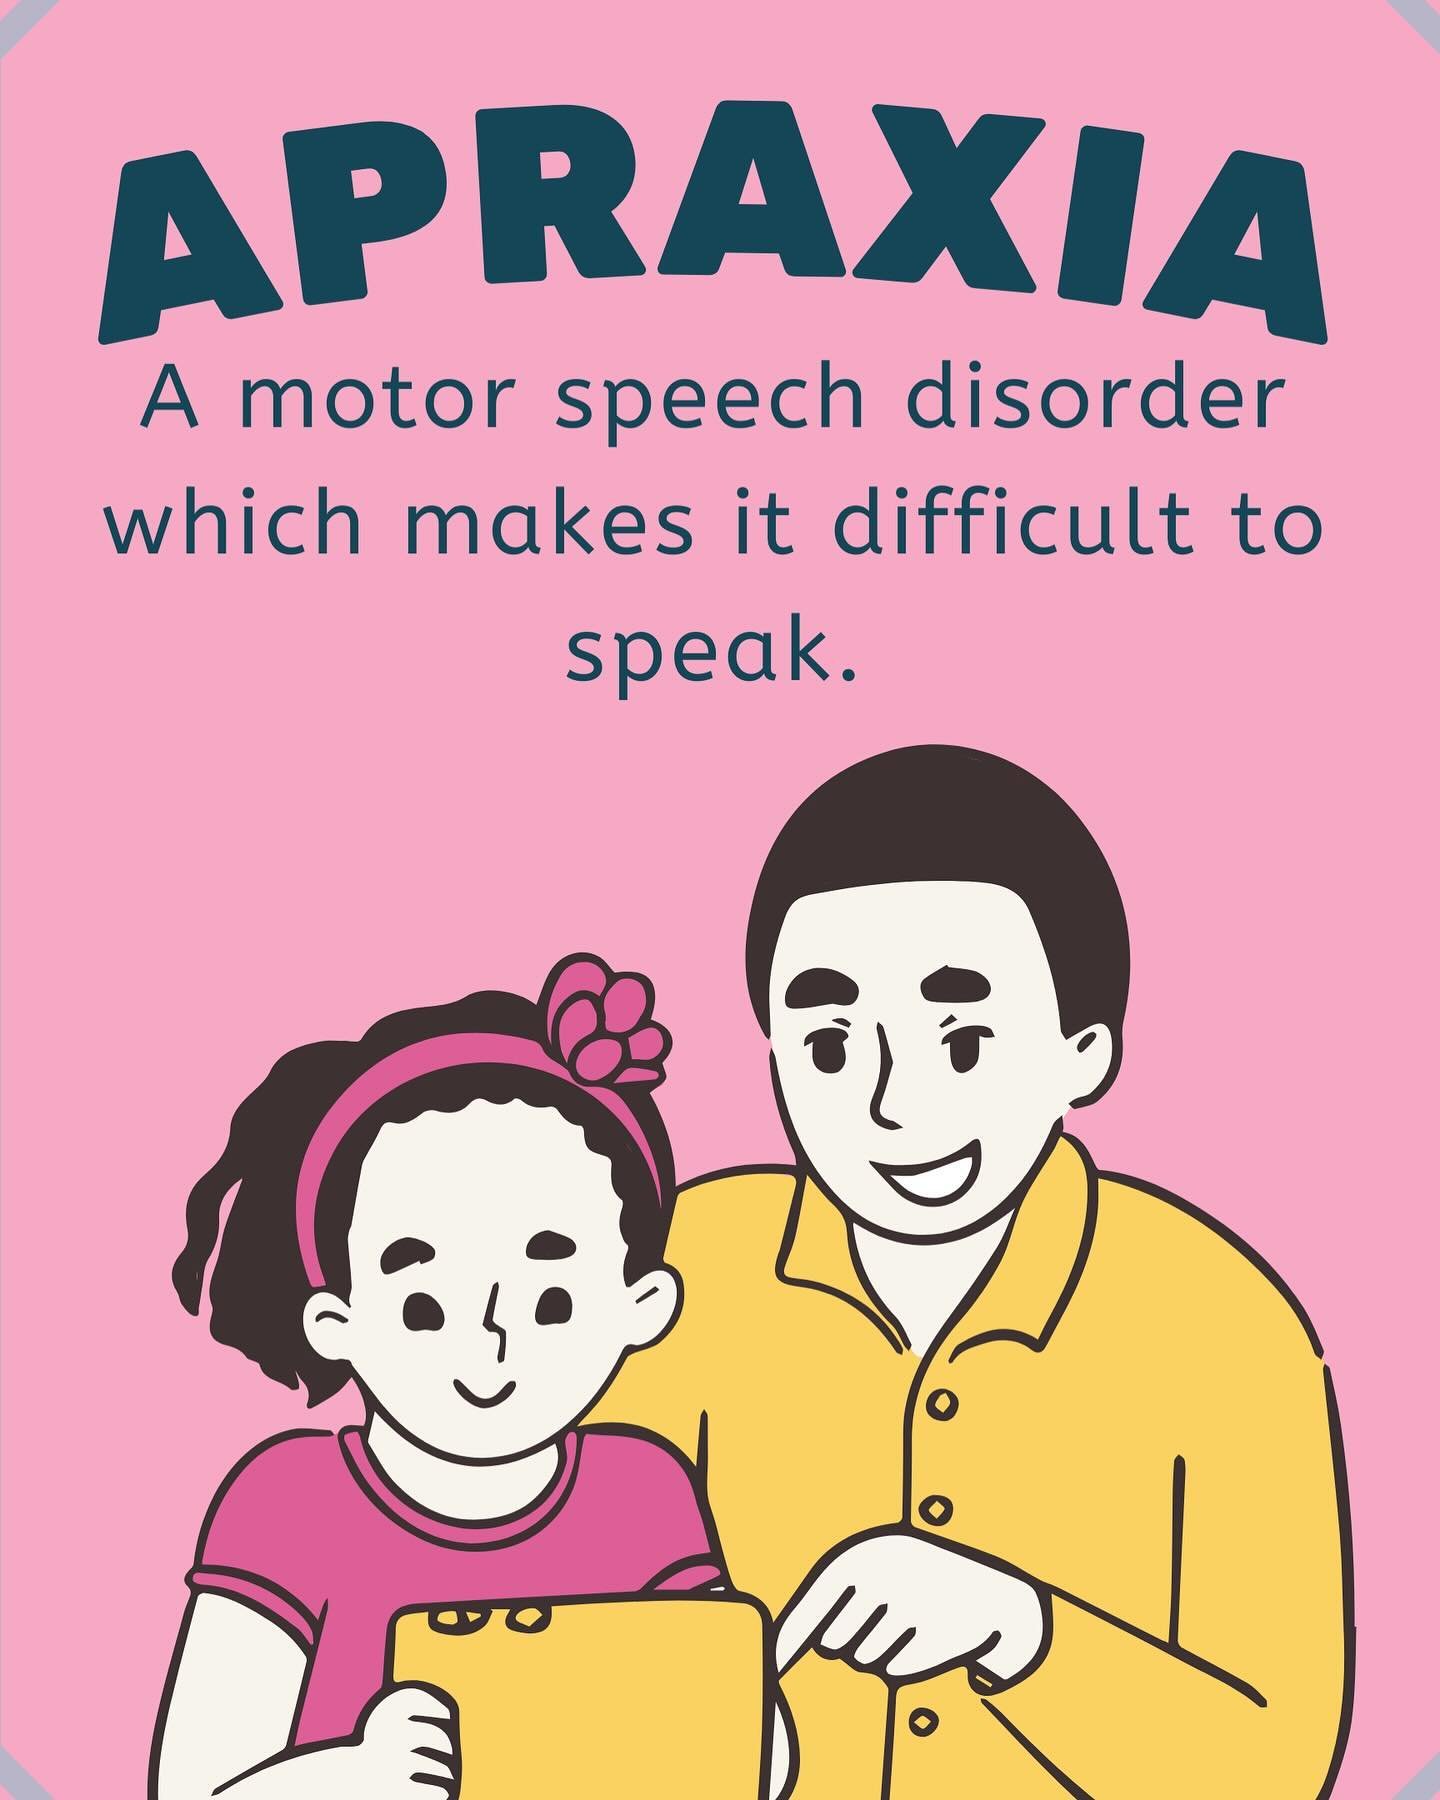 May 14th is Apraxia Awareness Day! 

Today we highlight apraxia, a motor speech disorder where the brain struggles to plan and coordinate the movements needed for clear speech. It&rsquo;s a journey that can be tough but filled with progress with the 